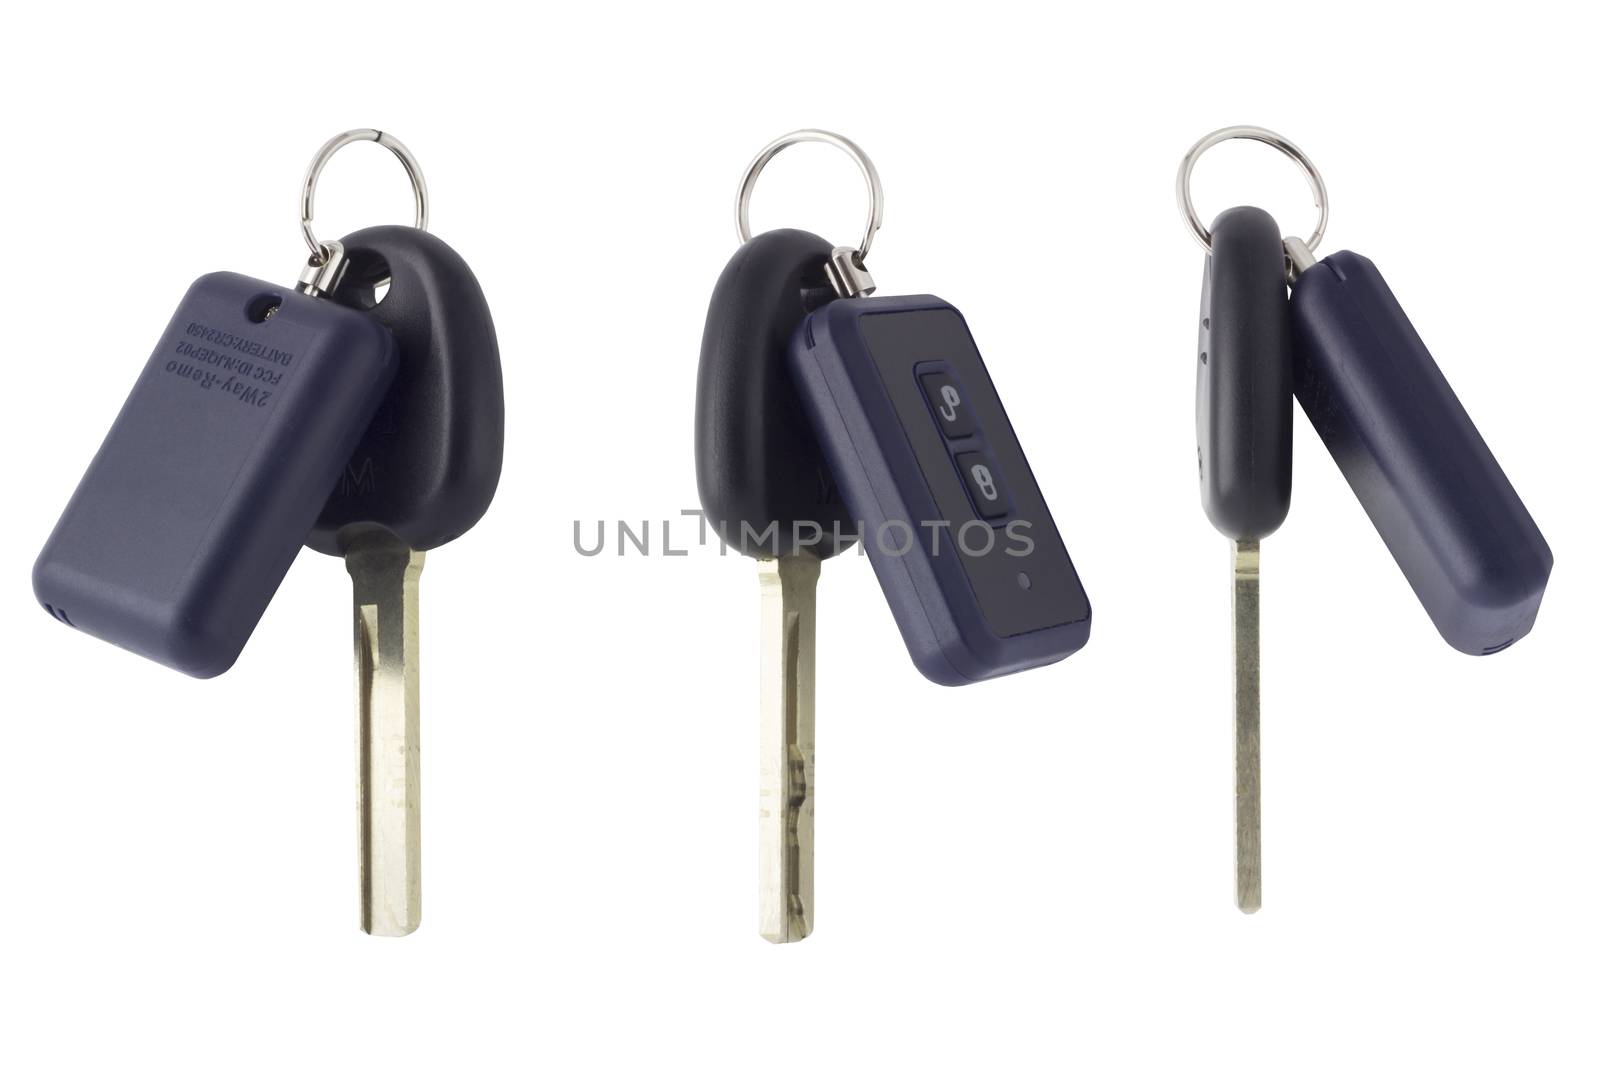 Photo car key and alarm fob. Three photos from different angles